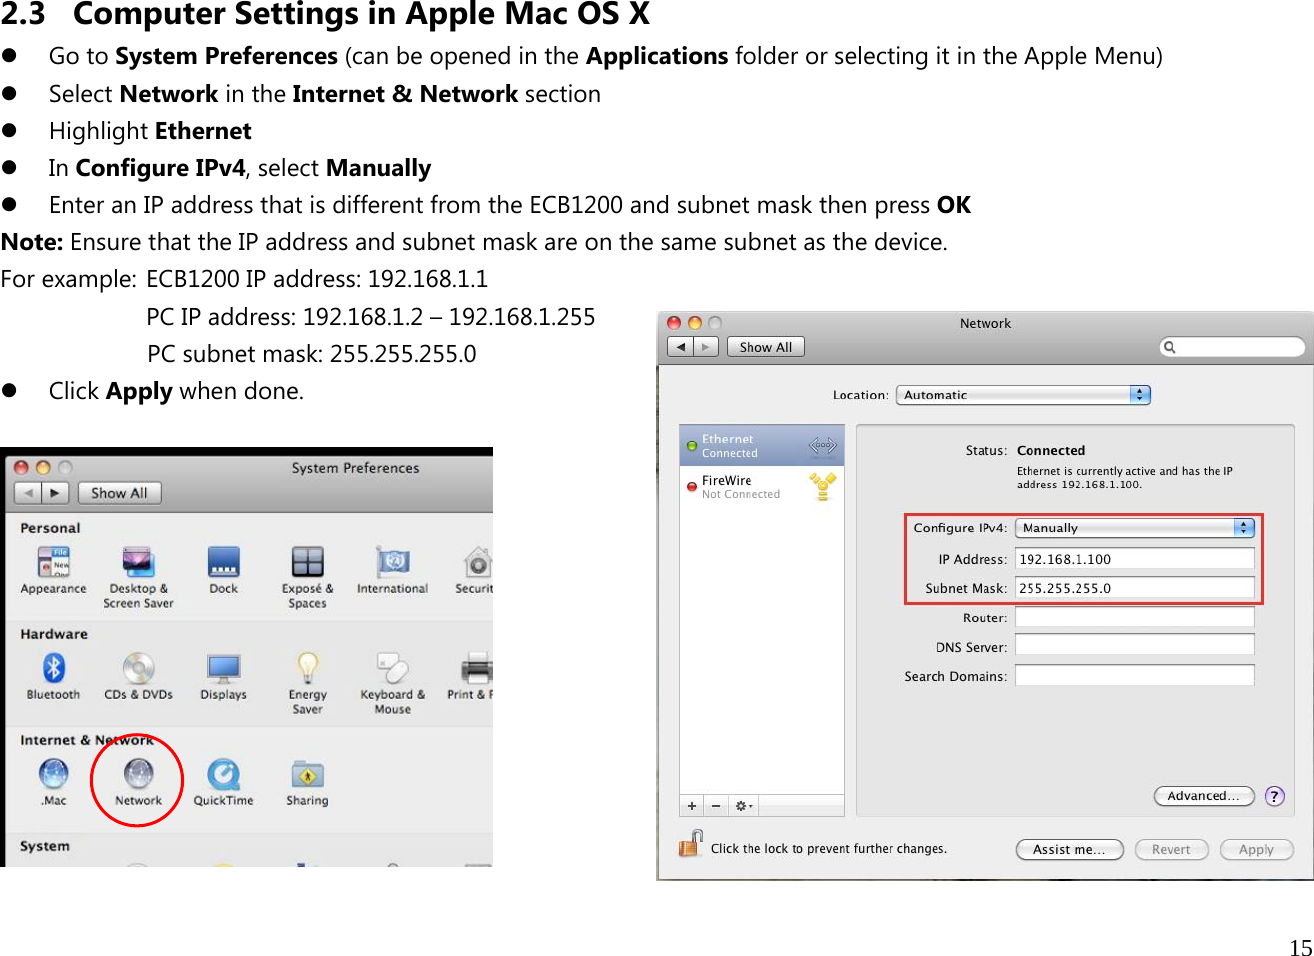  15  2.3 Computer Settings in Apple Mac OS X z Go to System Preferences (can be opened in the Applications folder or selecting it in the Apple Menu) z Select Network in the Internet &amp; Network section z Highlight Ethernet z In Configure IPv4, select Manually z Enter an IP address that is different from the ECB1200 and subnet mask then press OK Note: Ensure that the IP address and subnet mask are on the same subnet as the device.   For example:  ECB1200 IP address: 192.168.1.1 PC IP address: 192.168.1.2 – 192.168.1.255   PC subnet mask: 255.255.255.0 z Click Apply when done.   